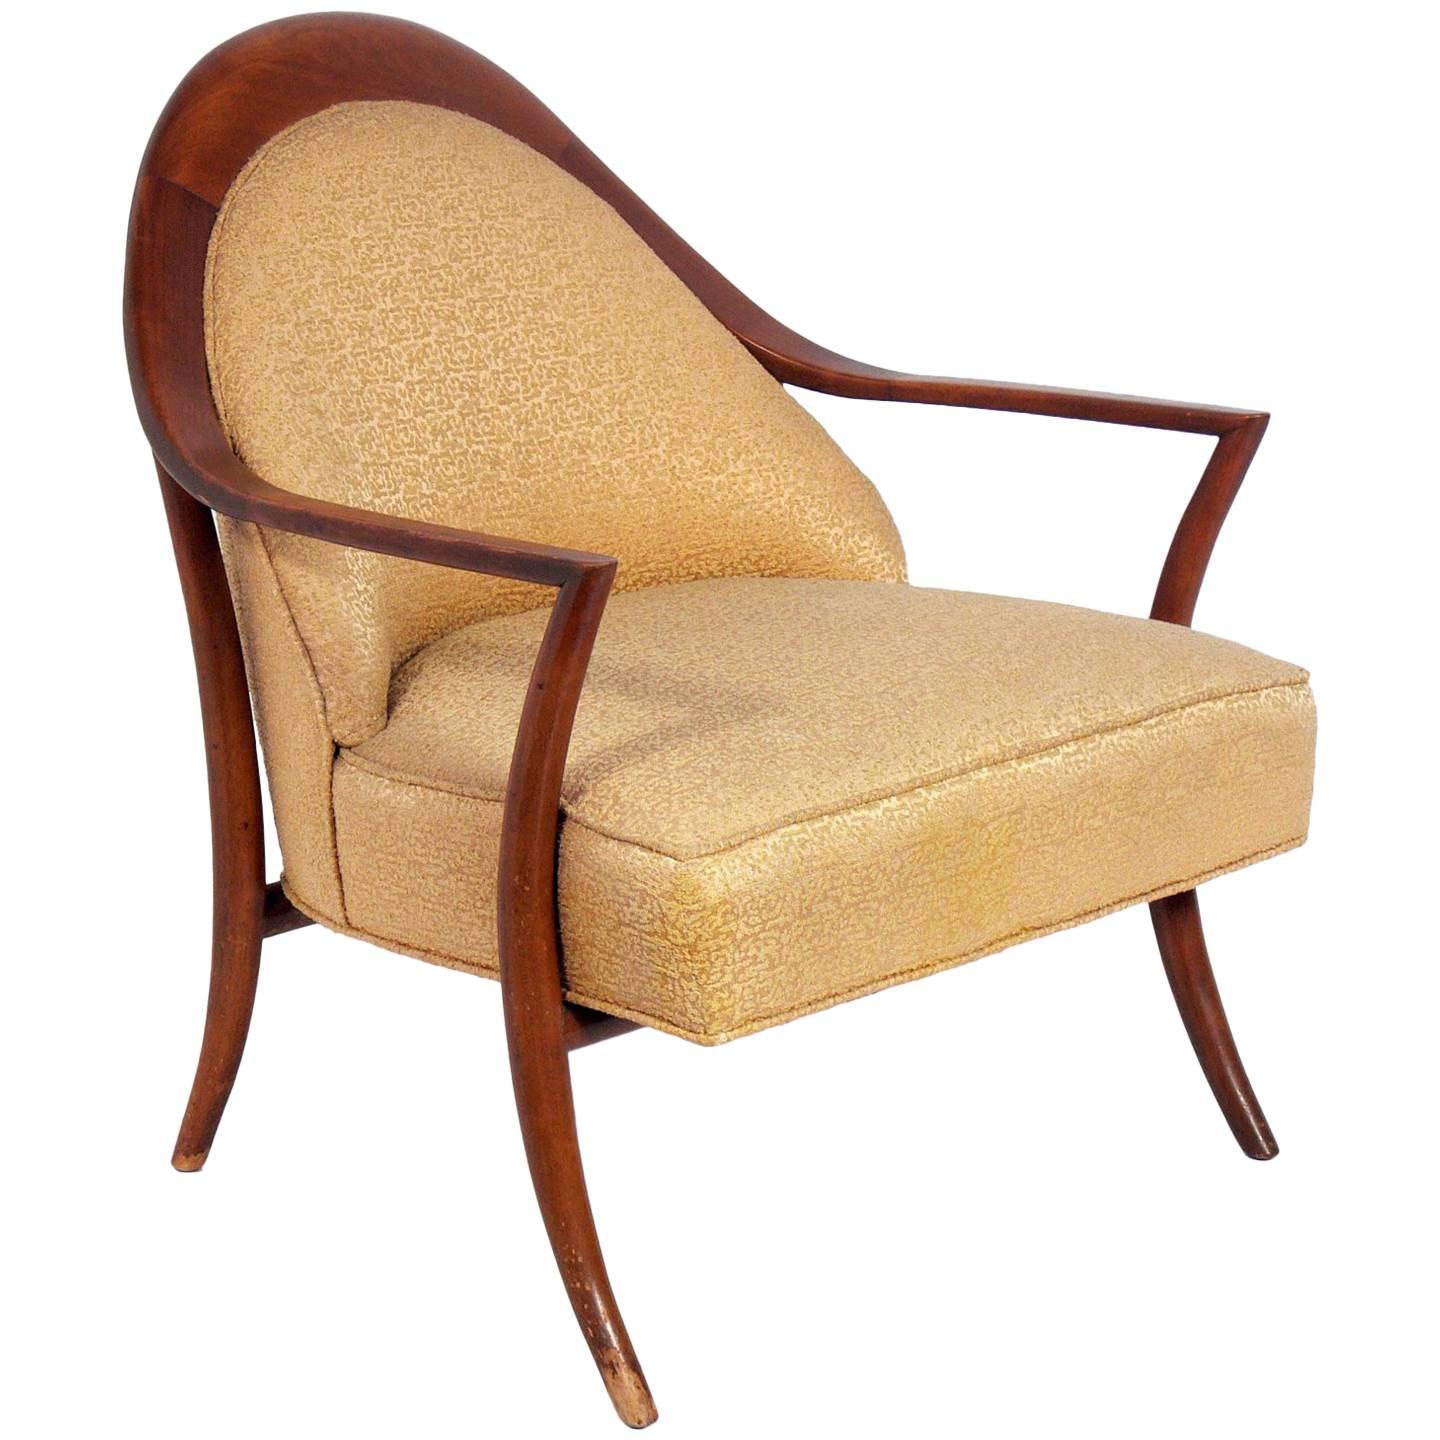 Curvaceous lounge chairs, designed by T.H. Robsjohn-Gibbings for Widdicomb, American, circa 1950s. These chairs are currently being refinished and reupholstered. They can be completed in your choice of finish color and reupholstered in your fabric.